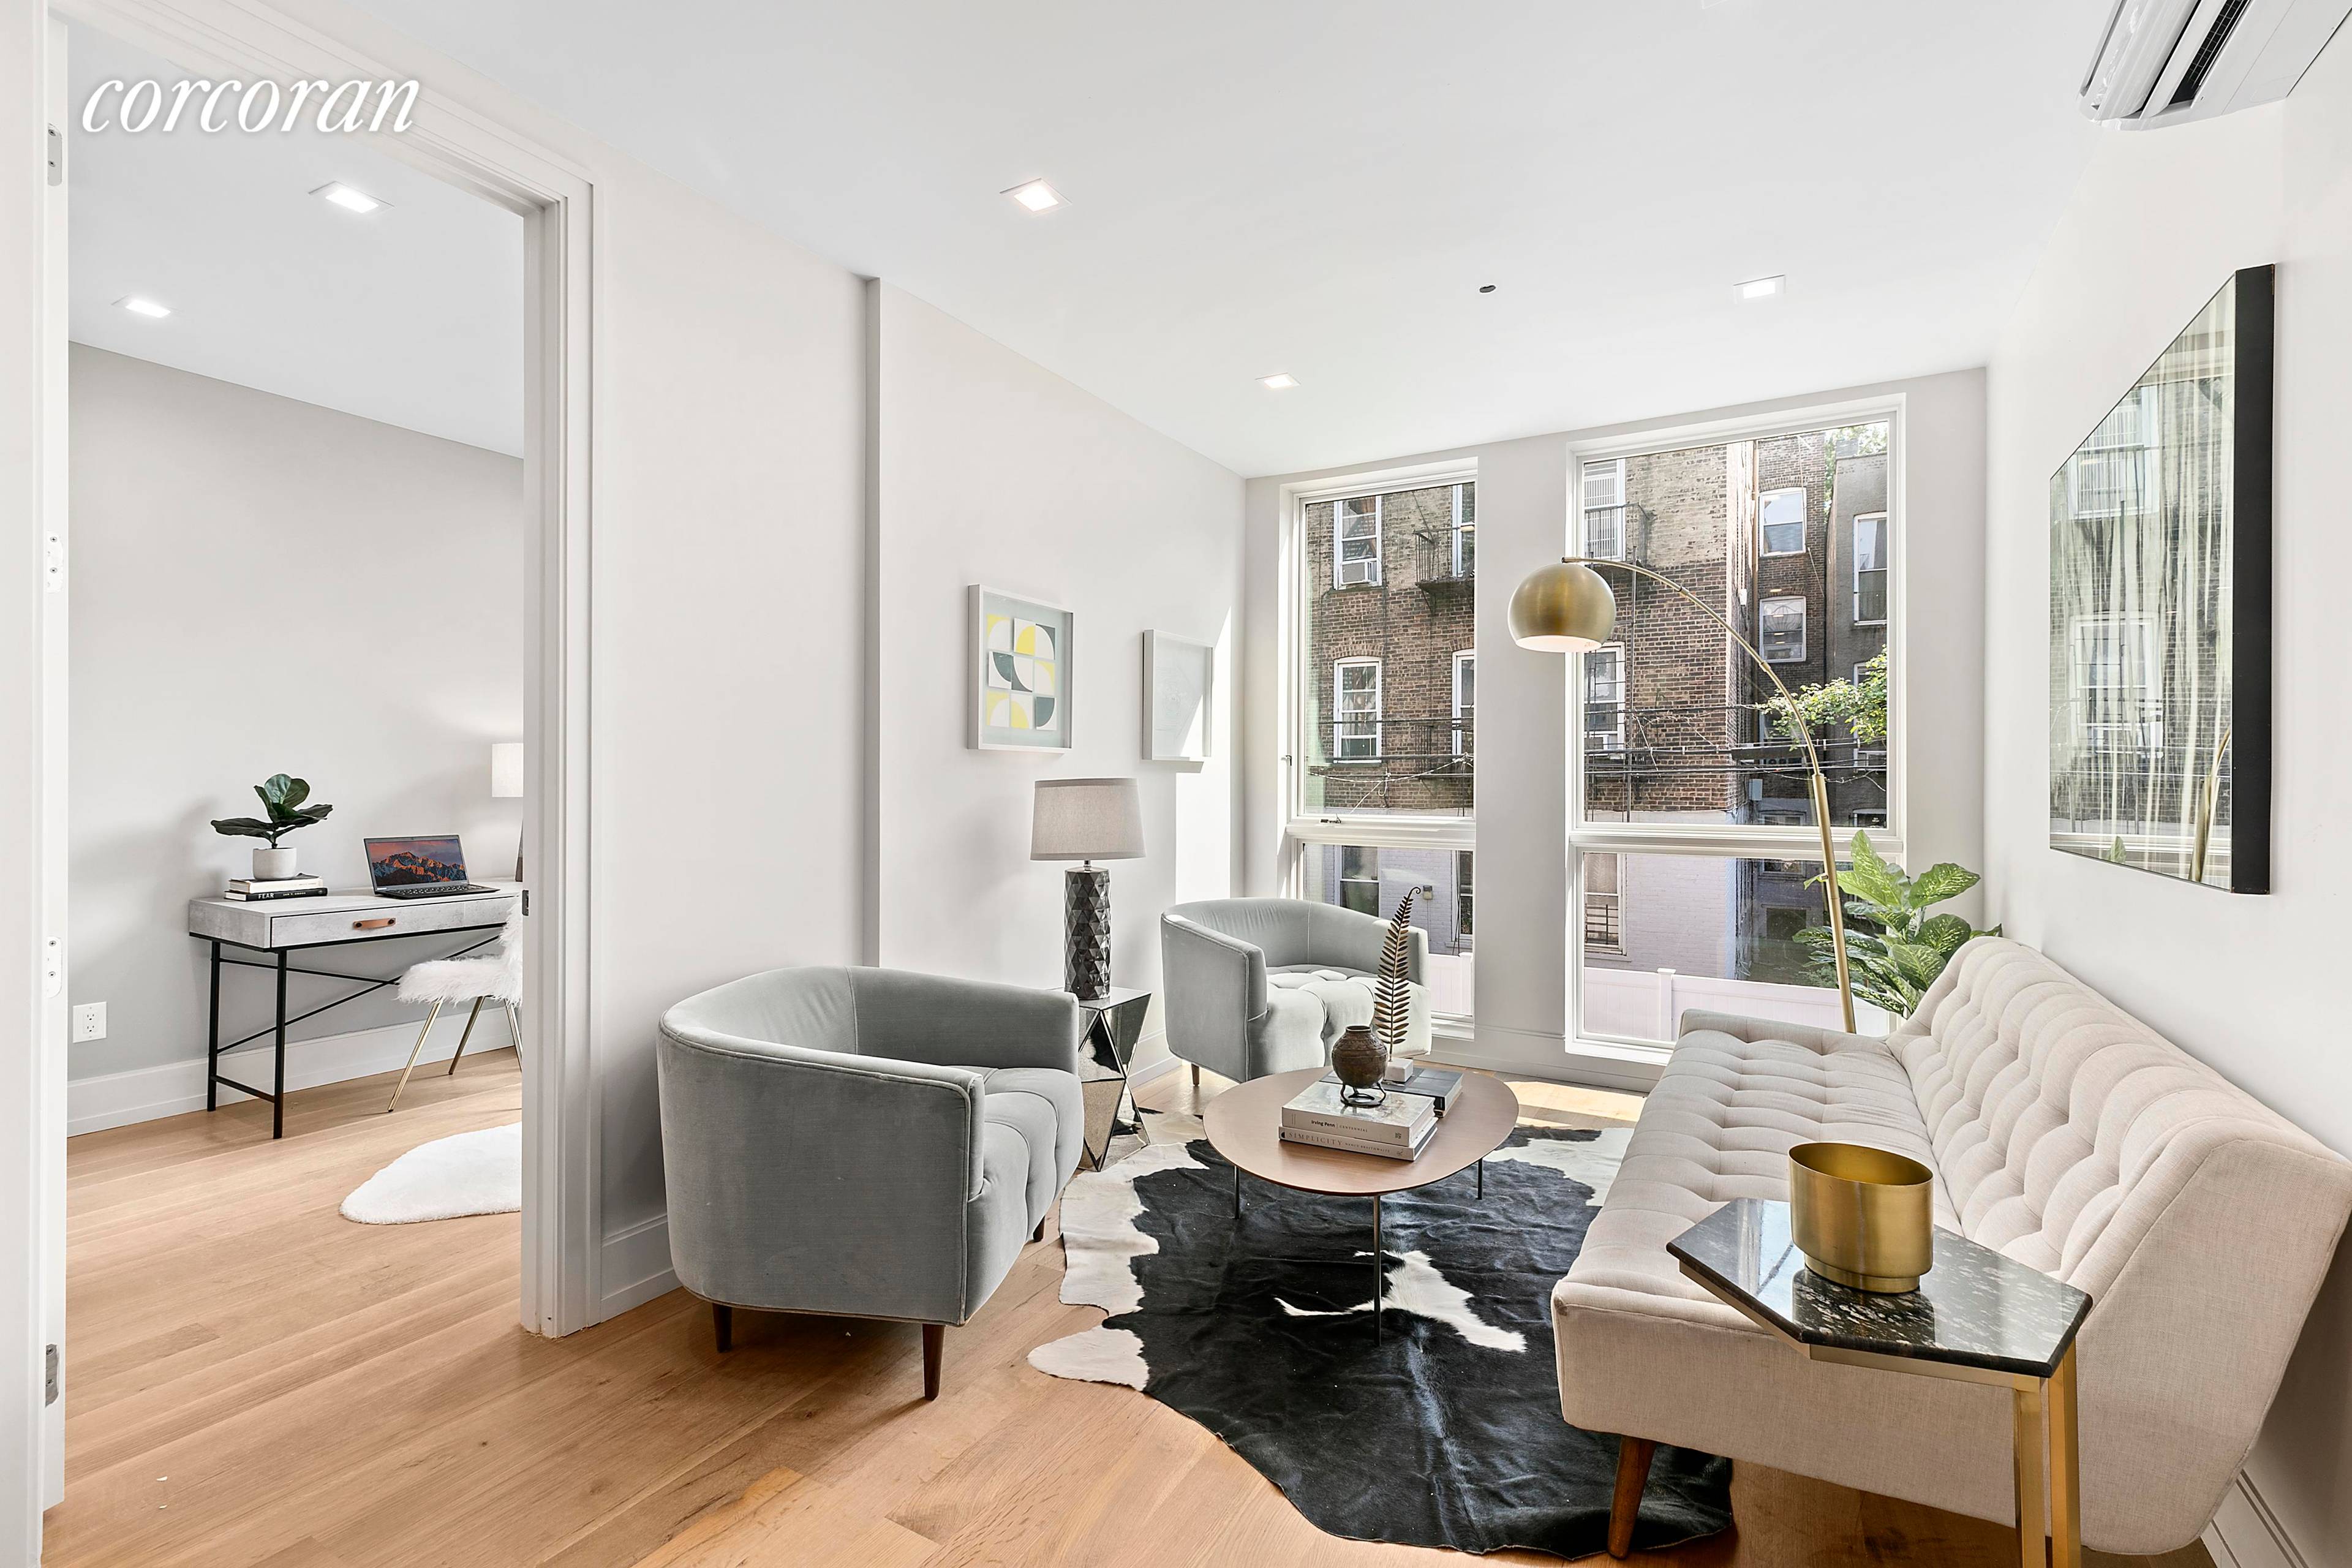 Welcome to 246 Maple Street, a newly built boutique condominium in the historic manor district of Prospect Lefferts Garden, Brooklyn.